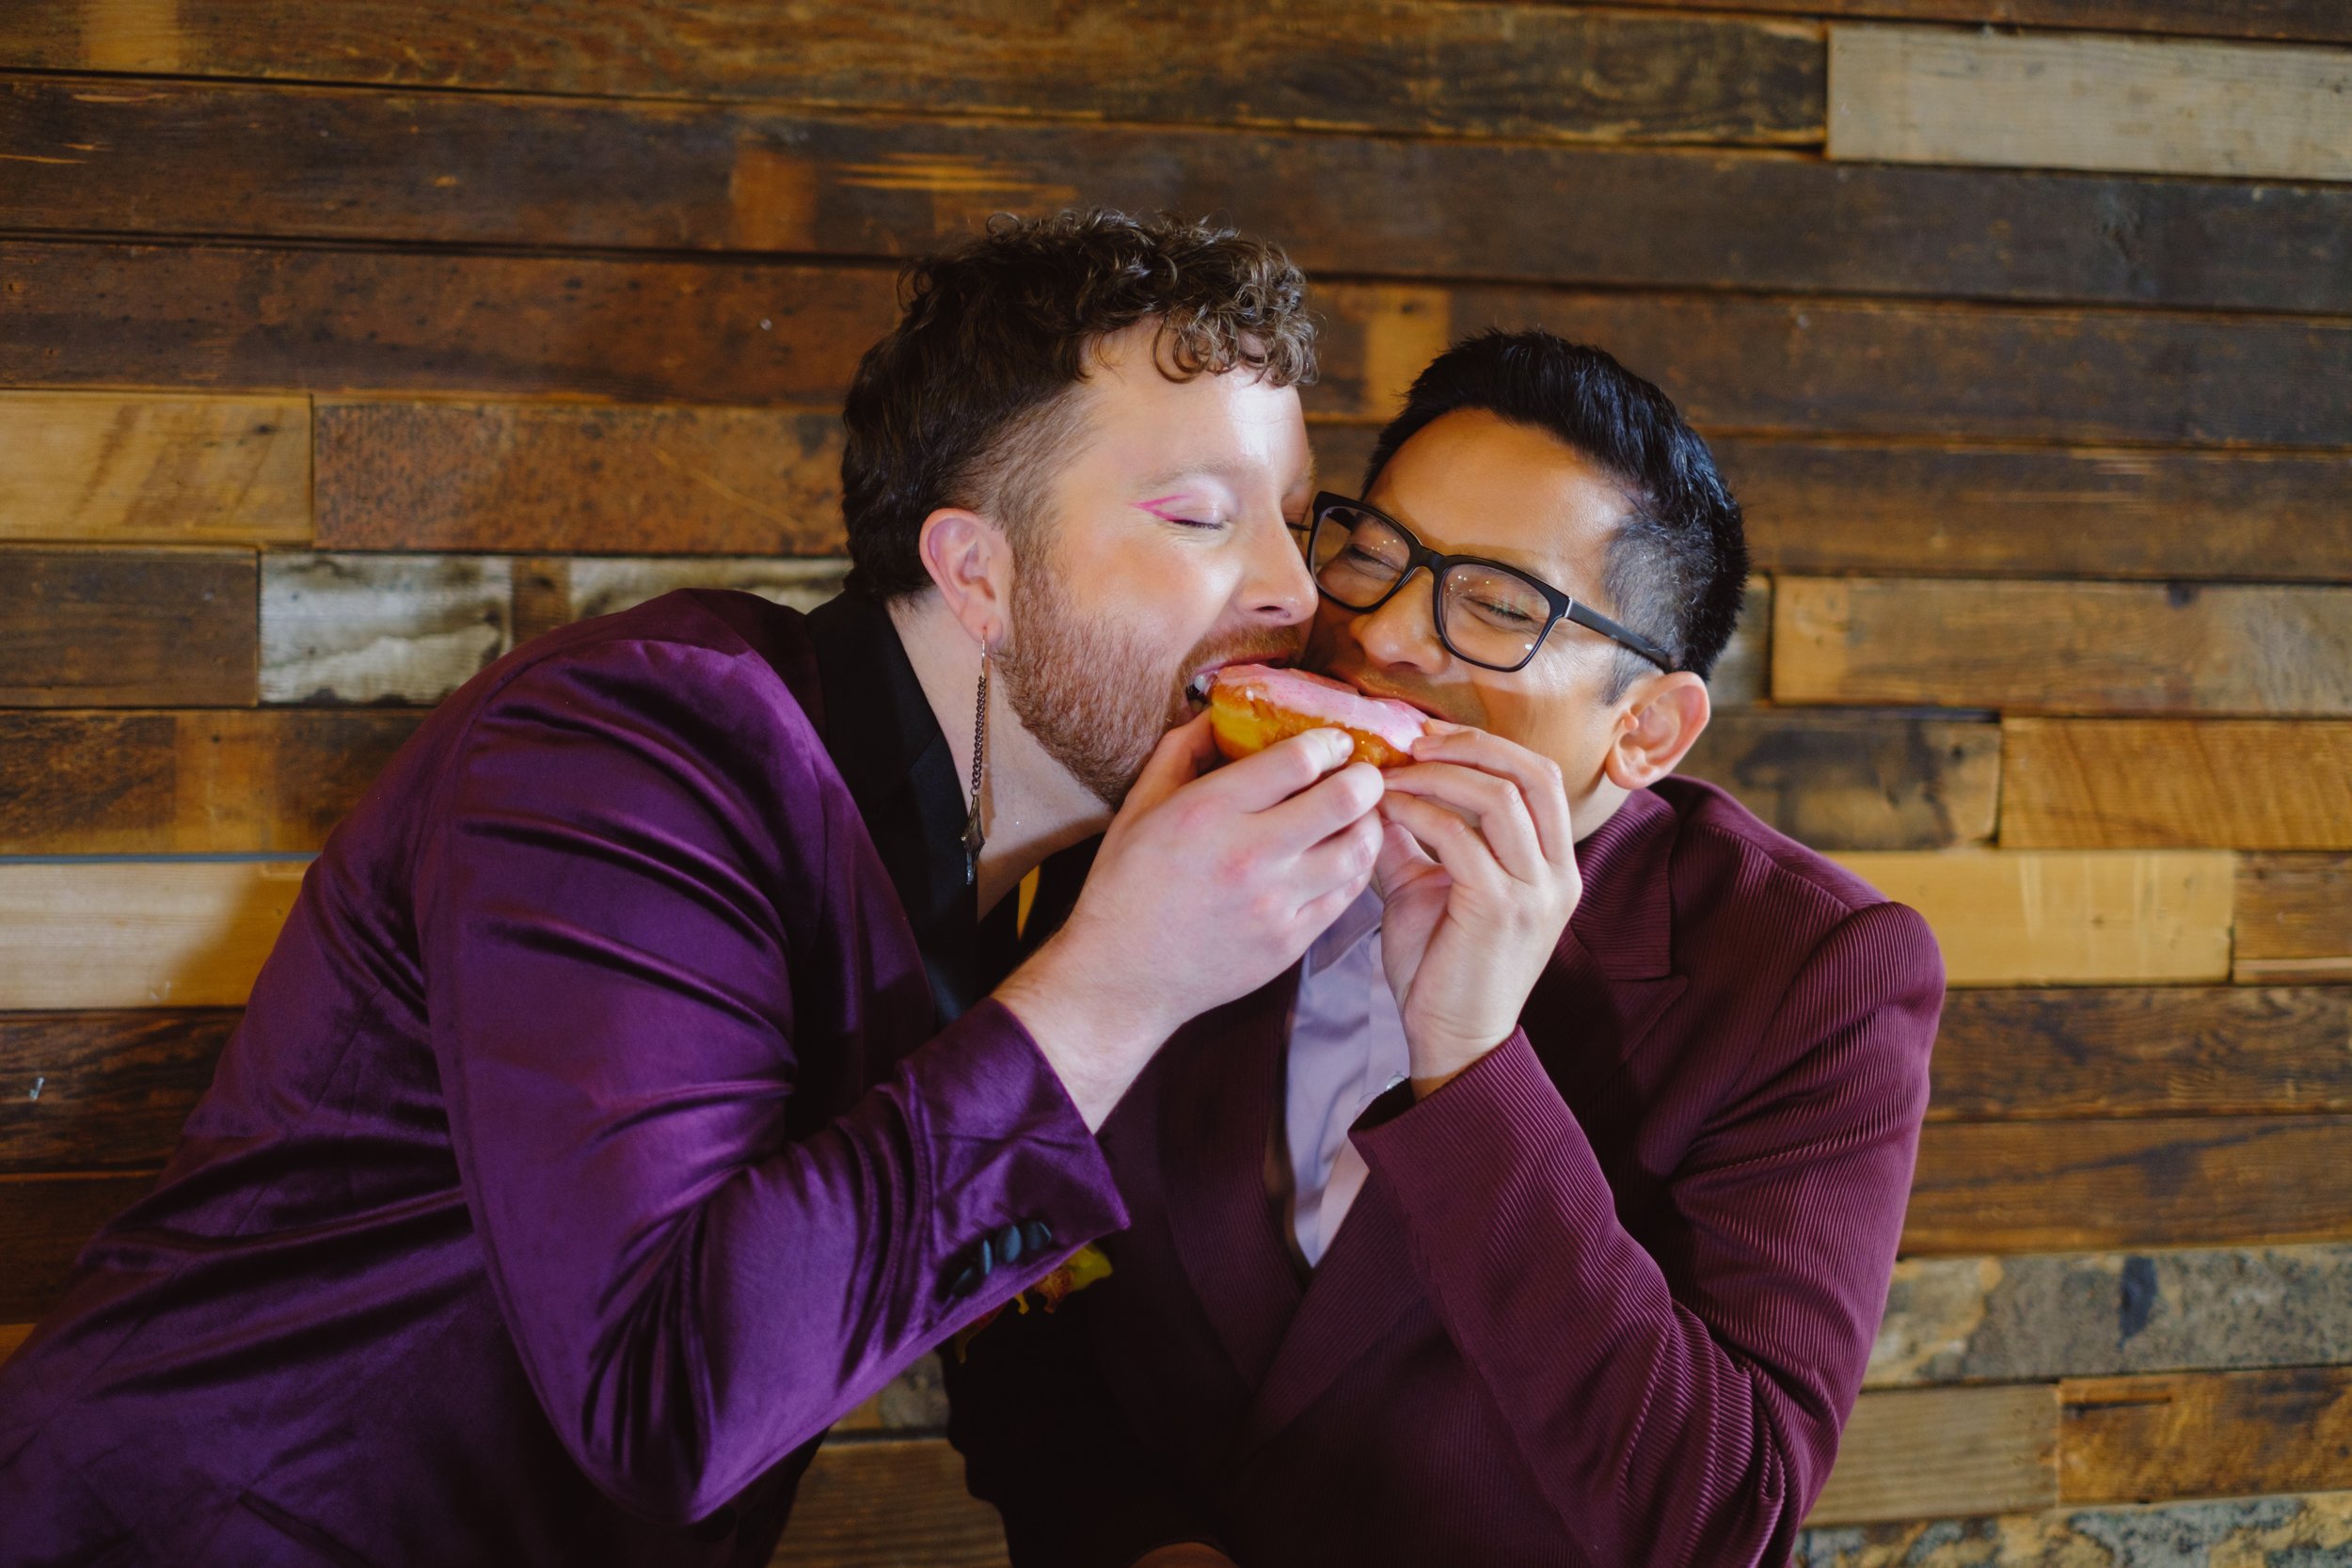  Two grooms both take a bite of the same donut. 